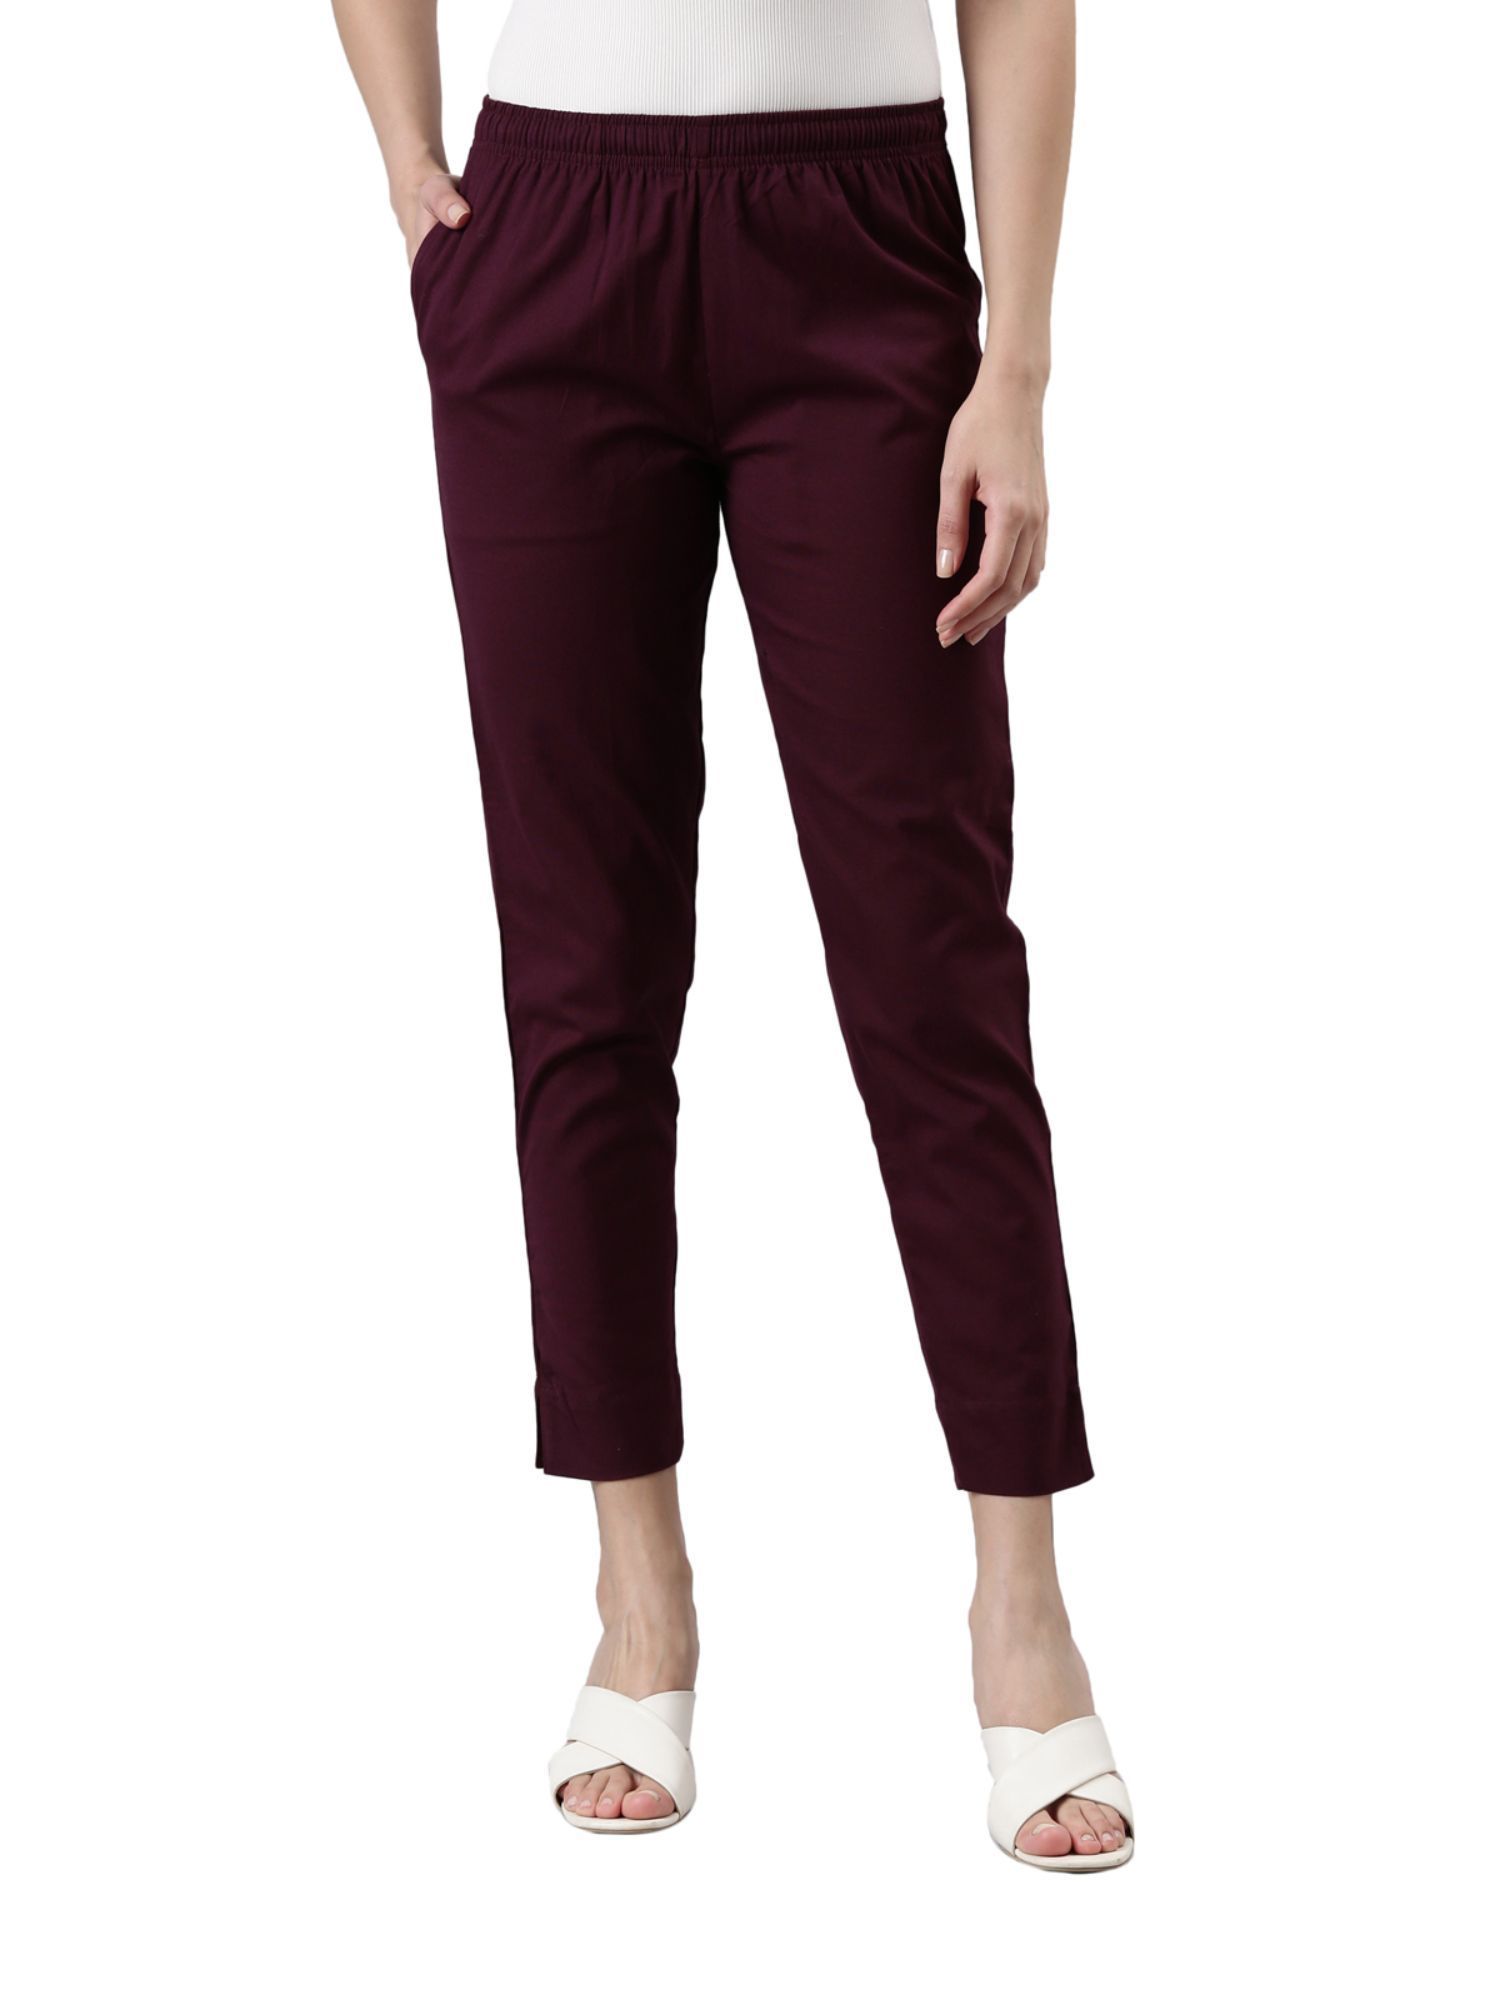 Mom's Complete Guide to Styling Burgundy Pants (with free printable!) -  Easy Fashion for Moms